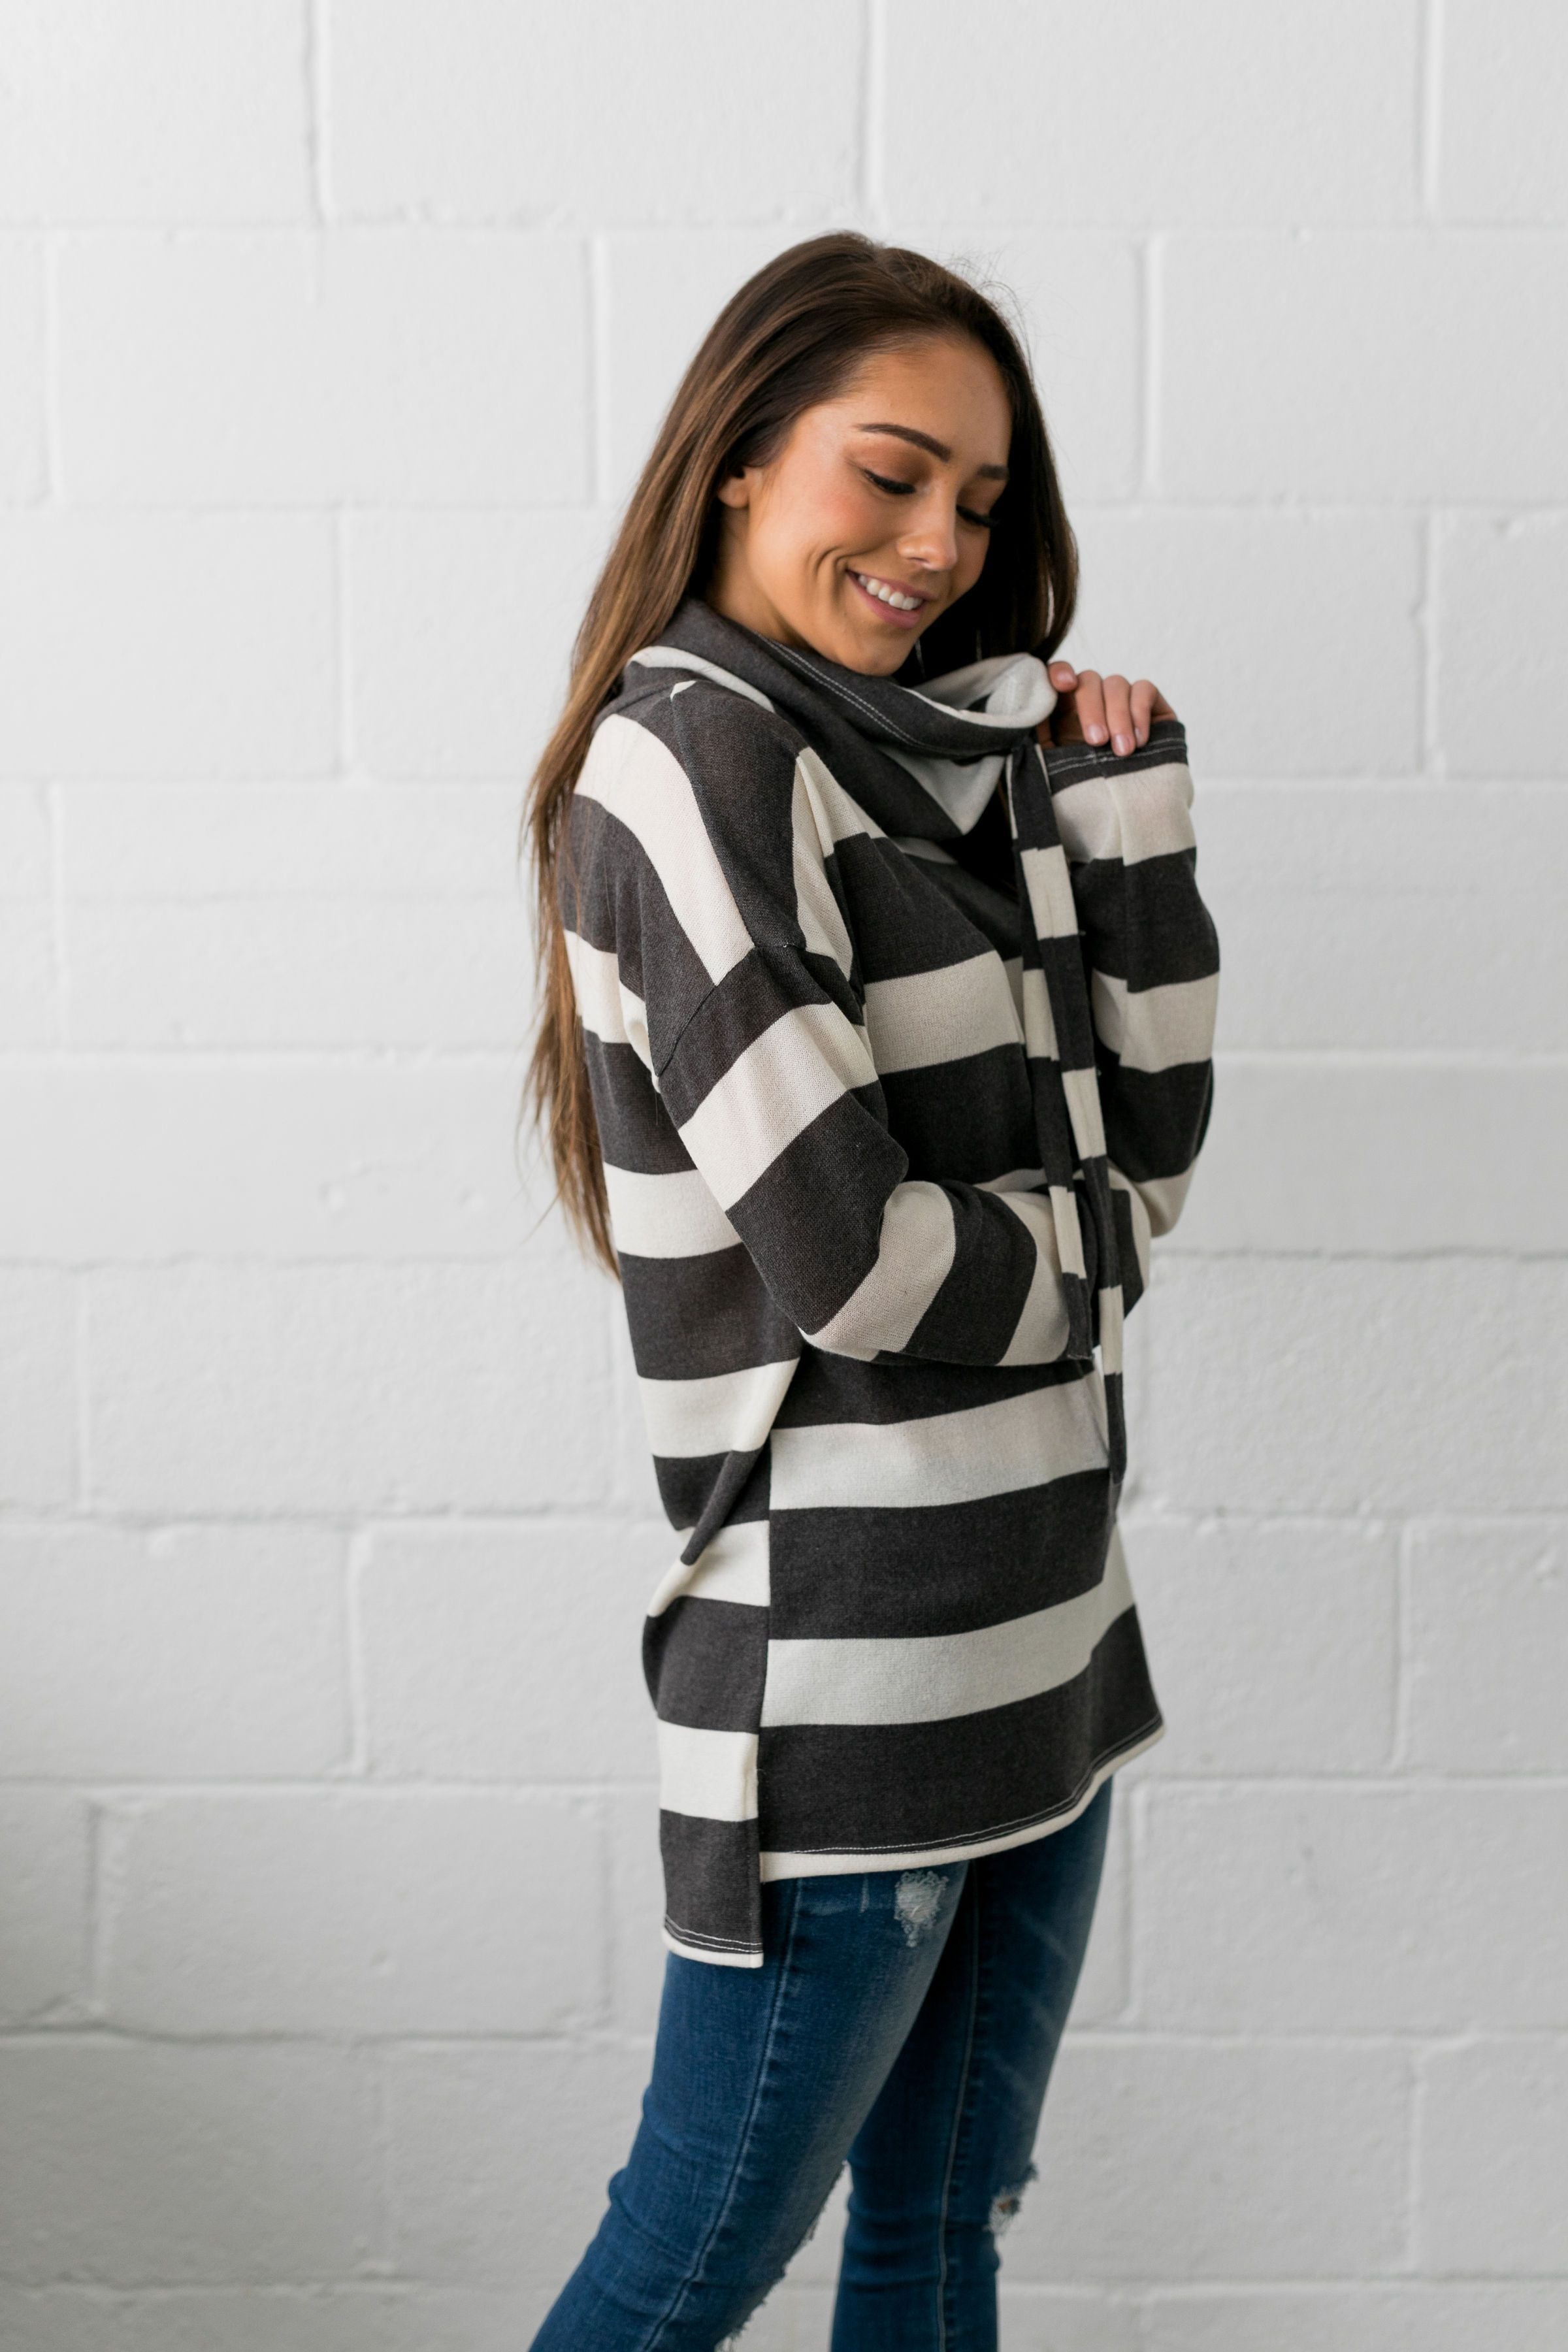 Read Between The Lines Cowl Neck - ALL SALES FINAL